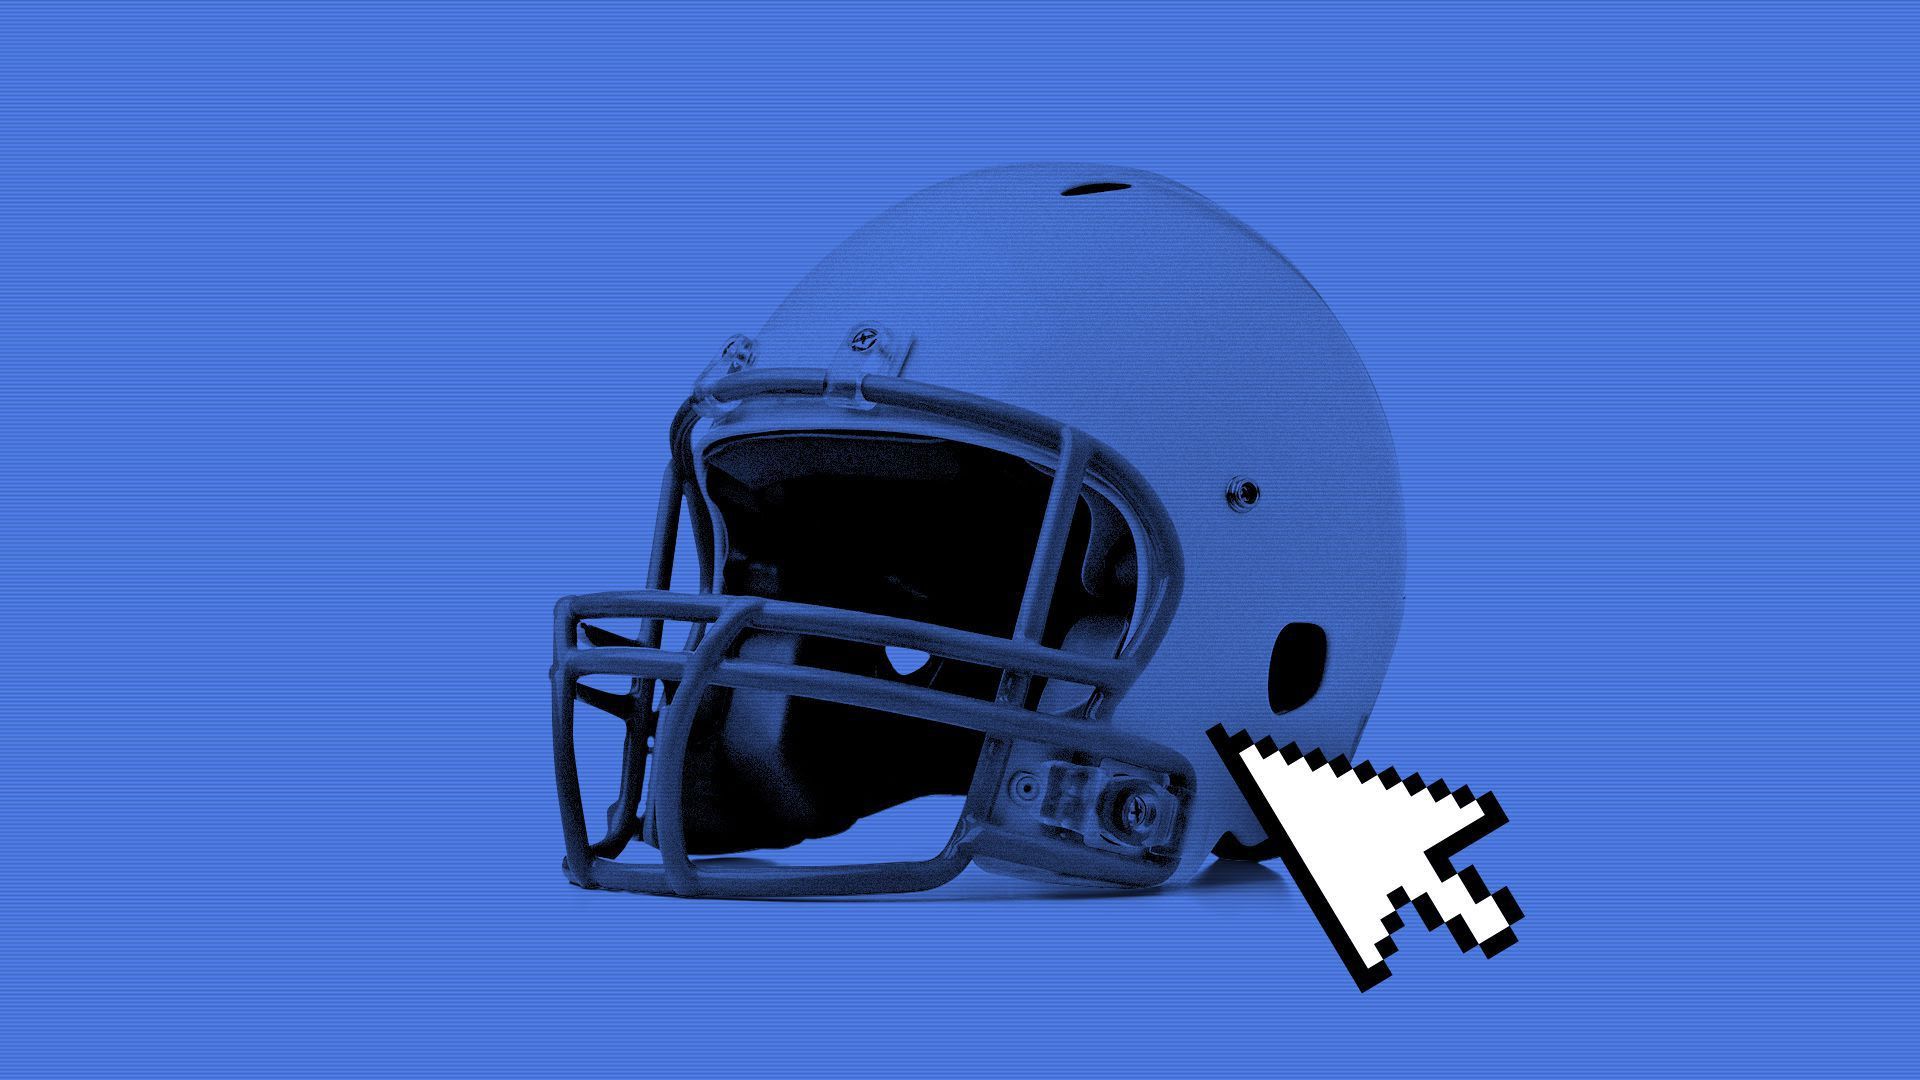 An illustration of a football helmet being clicked on.